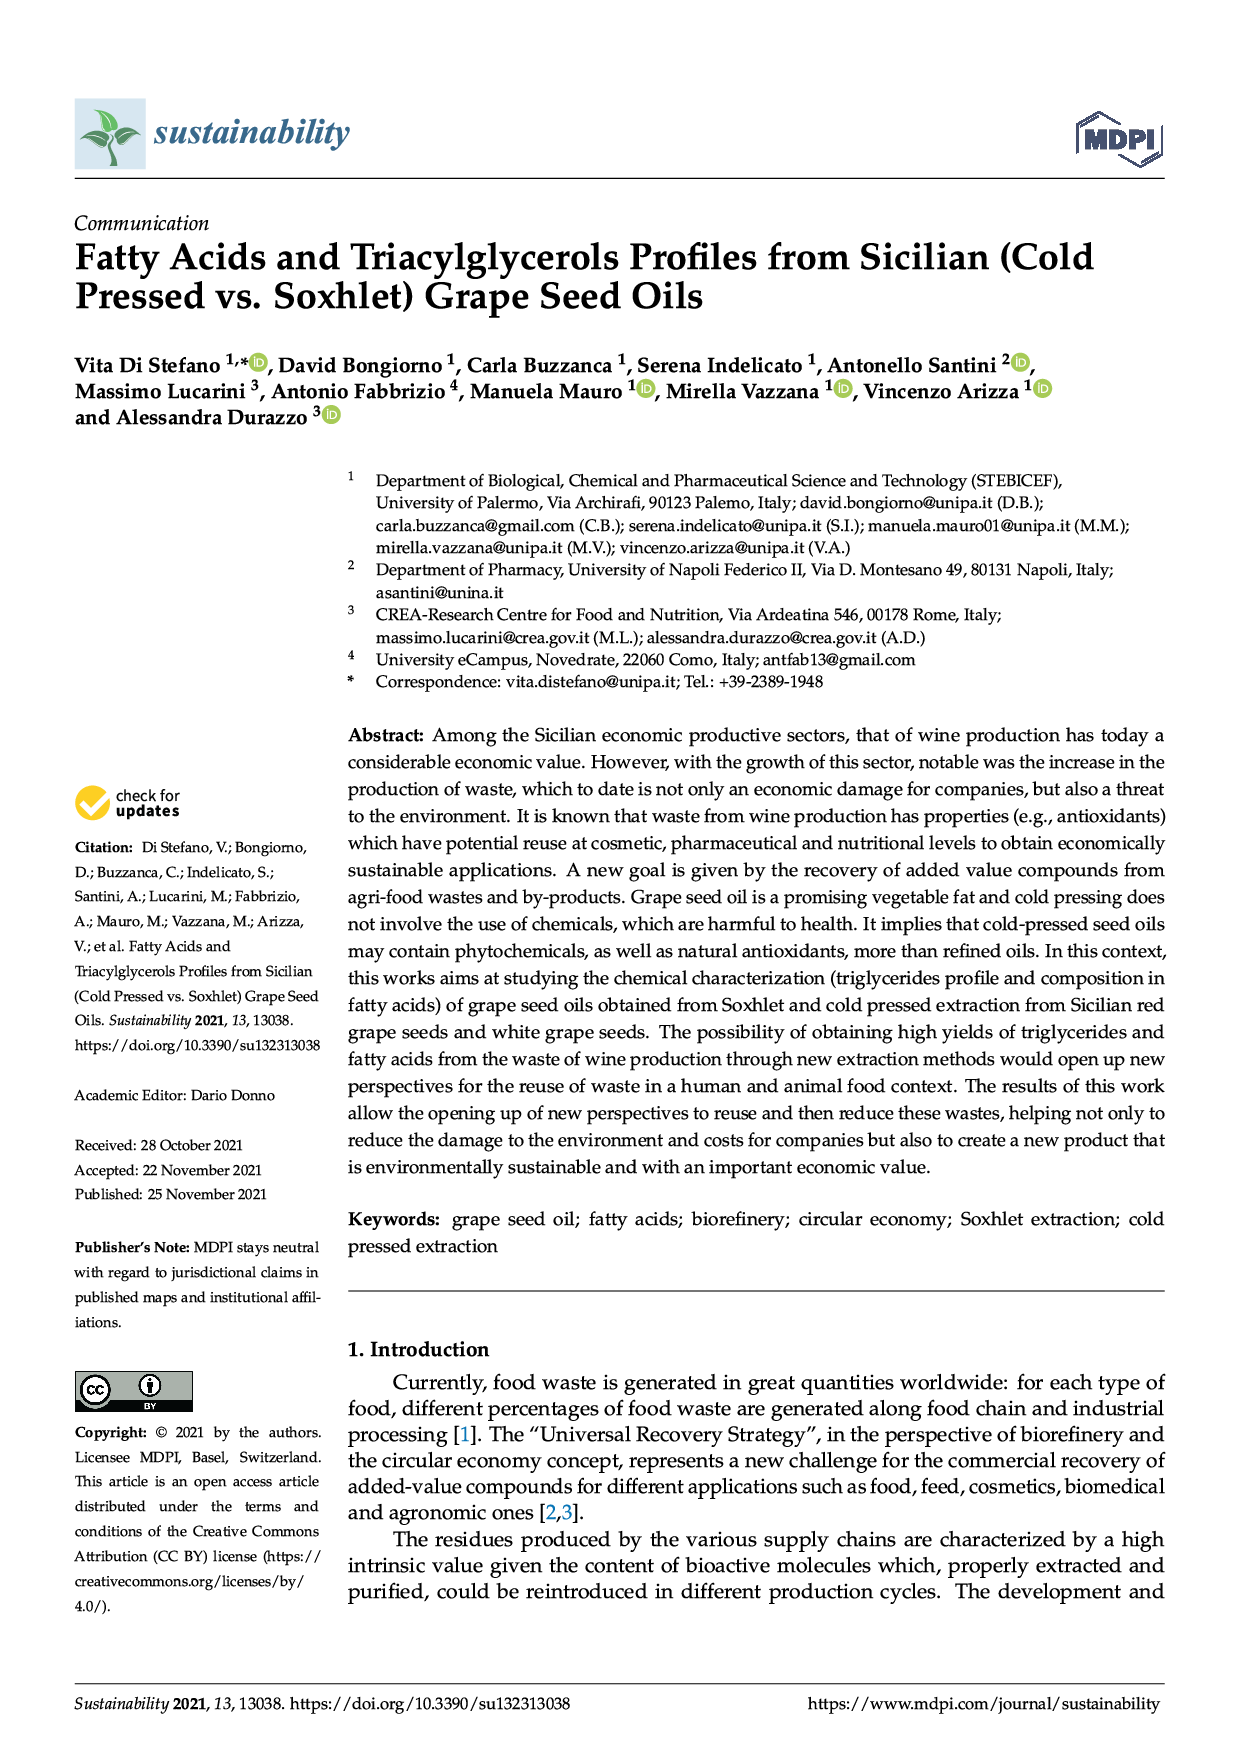 Fatty Acids and Triacylglycerols Profiles from Sicilian (Cold Pressed vs. Soxhlet) Grape Seed Oils